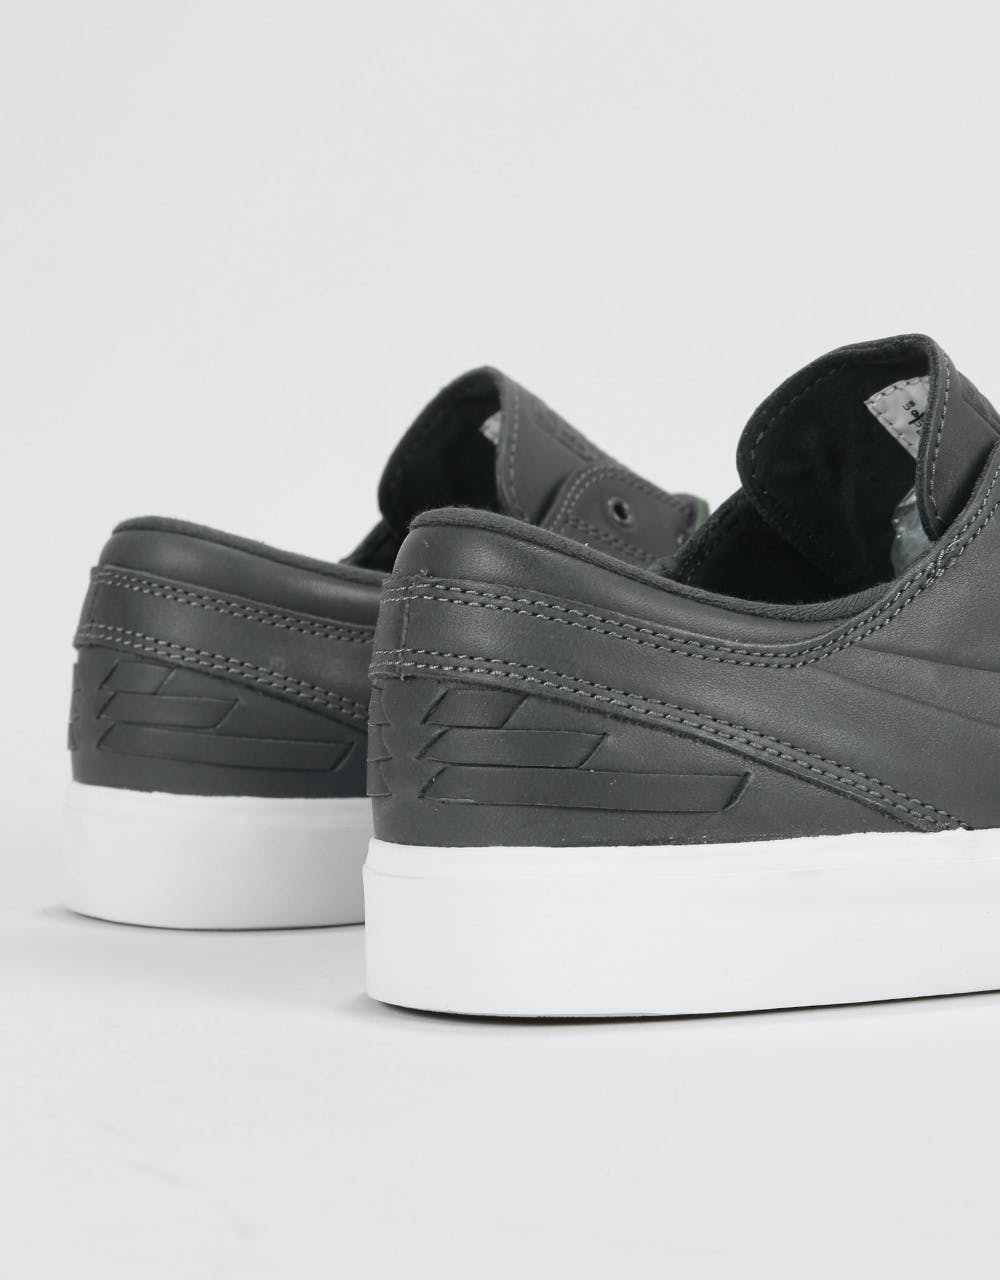 Nike SB Zoom Janoski RM Crafted Skate Shoes - Anthracite/White